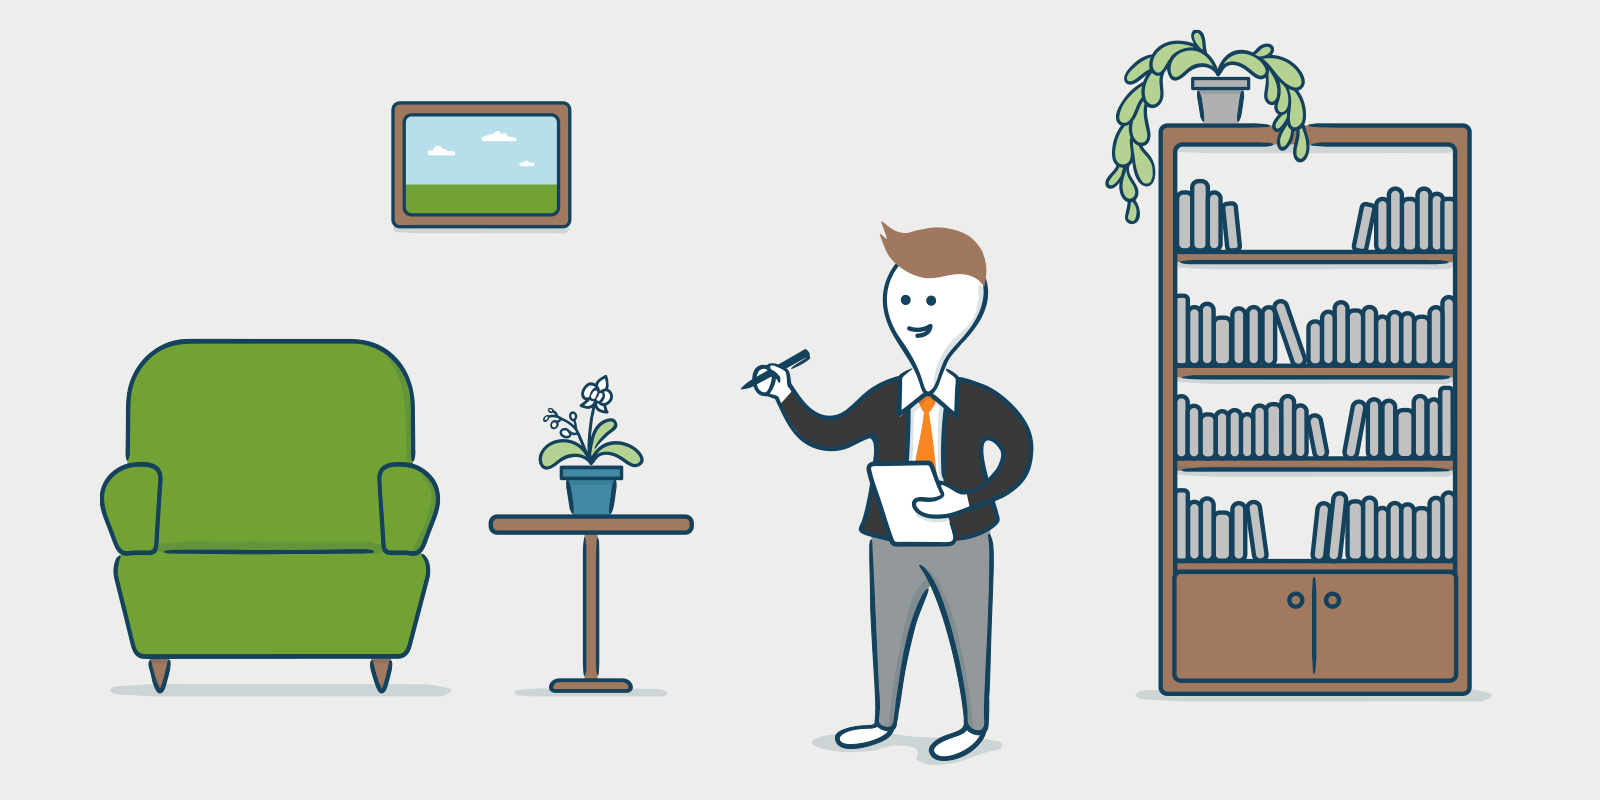 How to manage properties: A simple guide